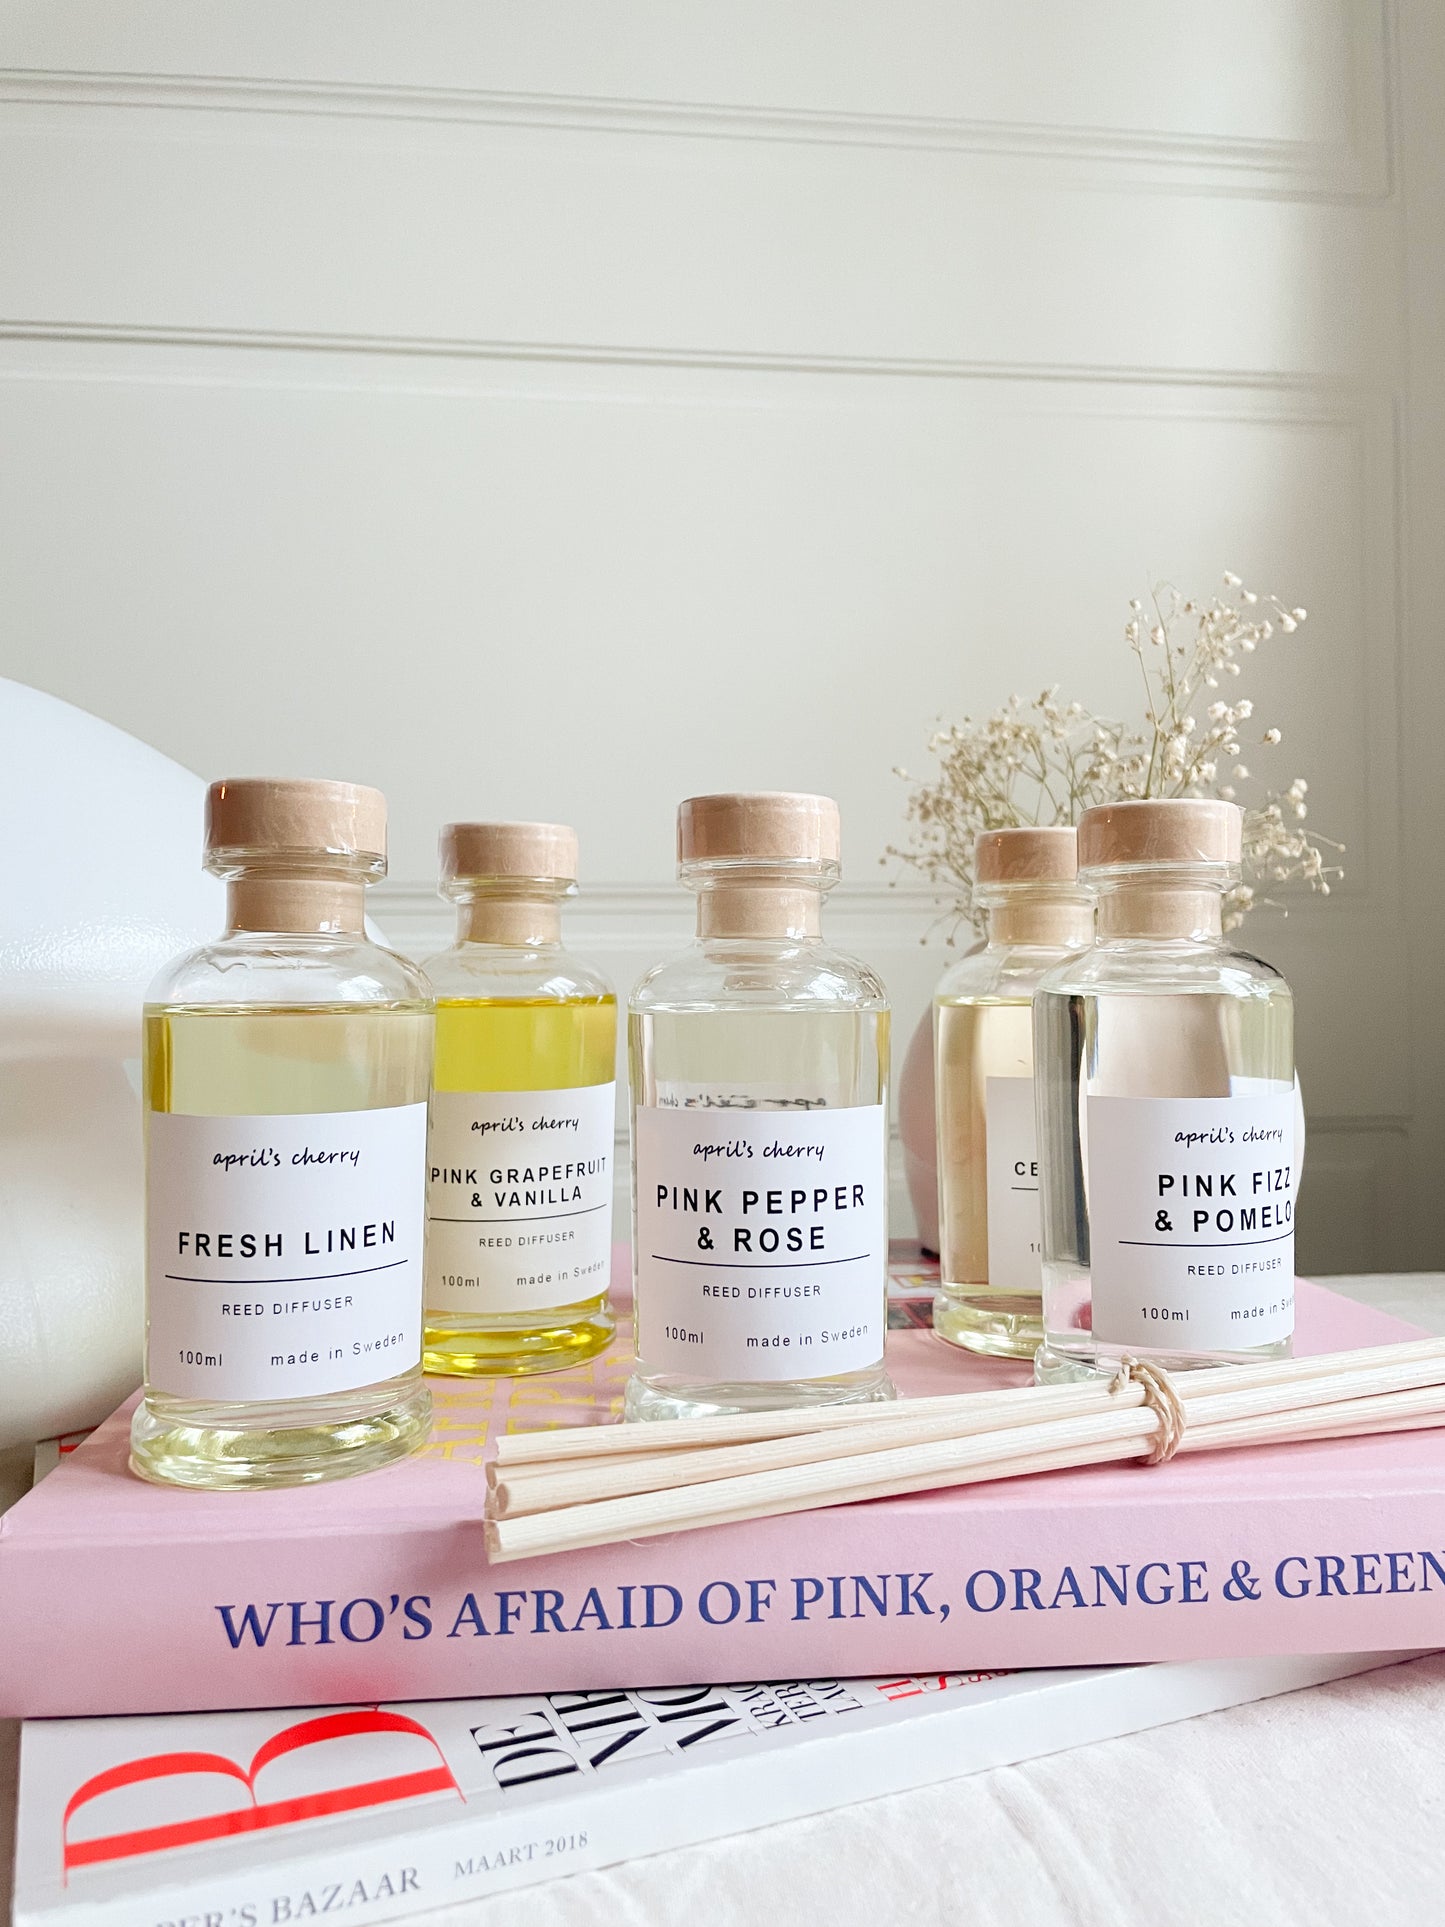 Pink Fizz & Pomelo Reed Diffuser